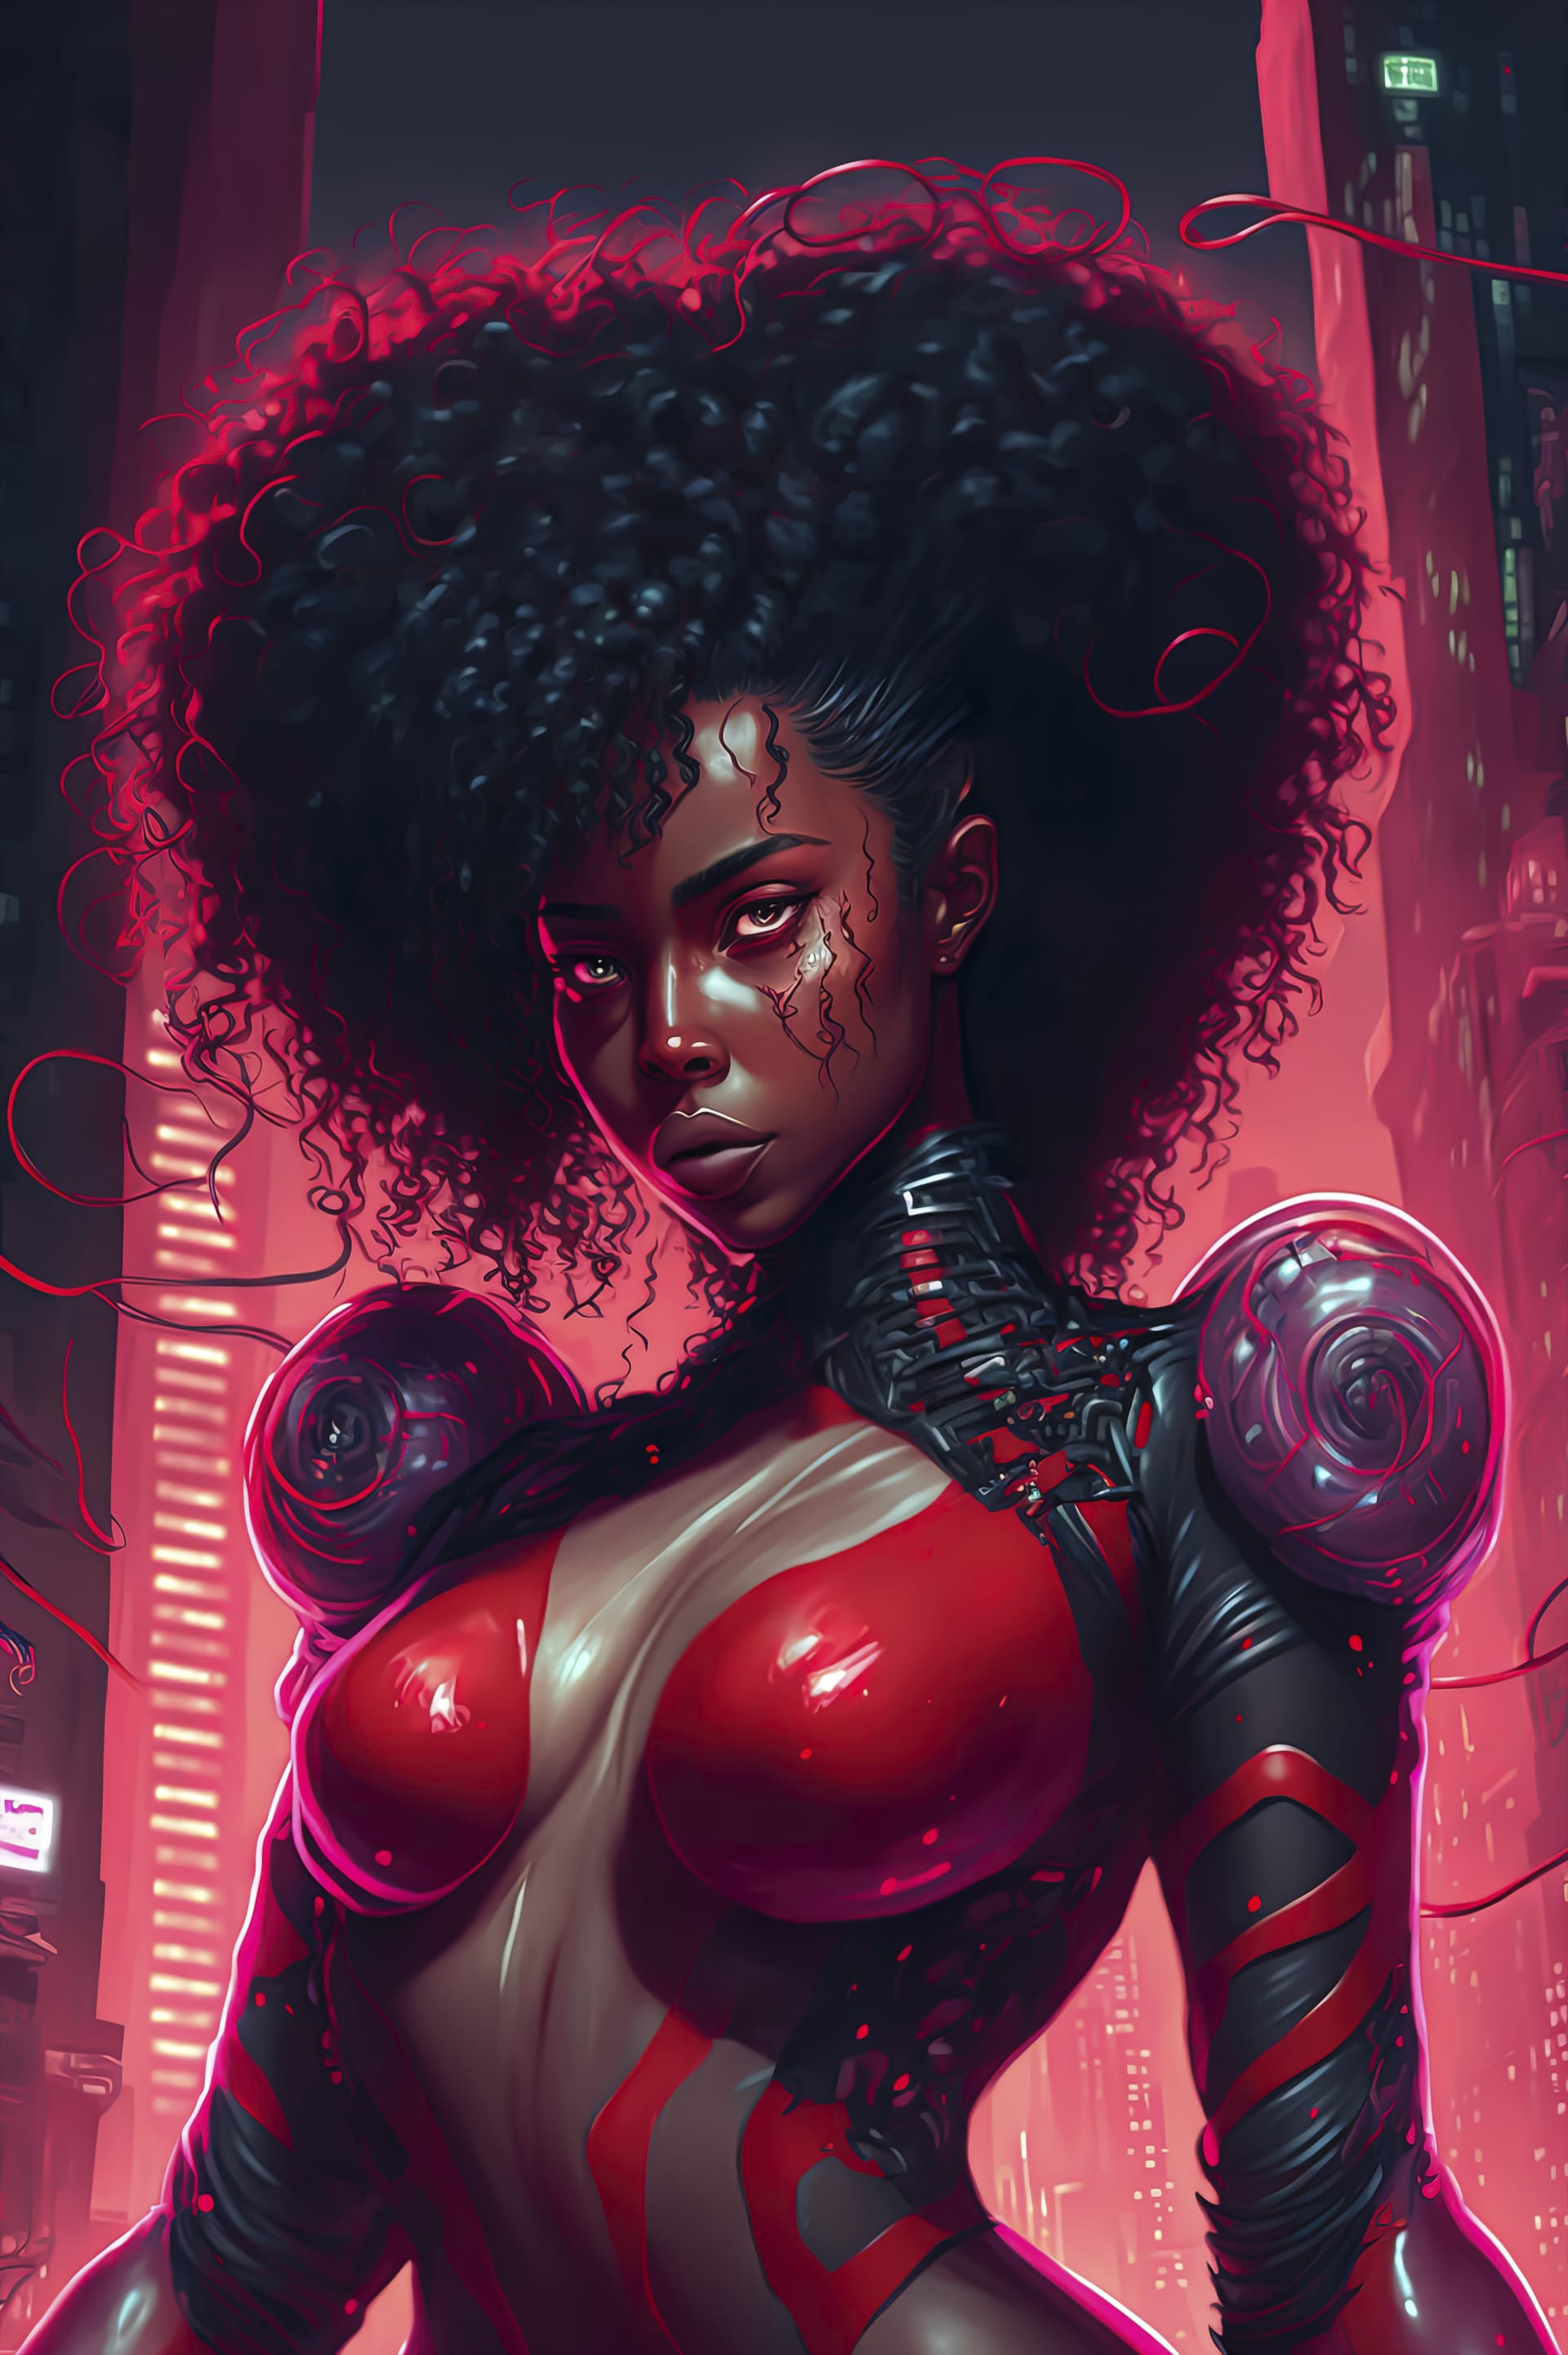 Woman red black outfit standing front city cyberpunk art